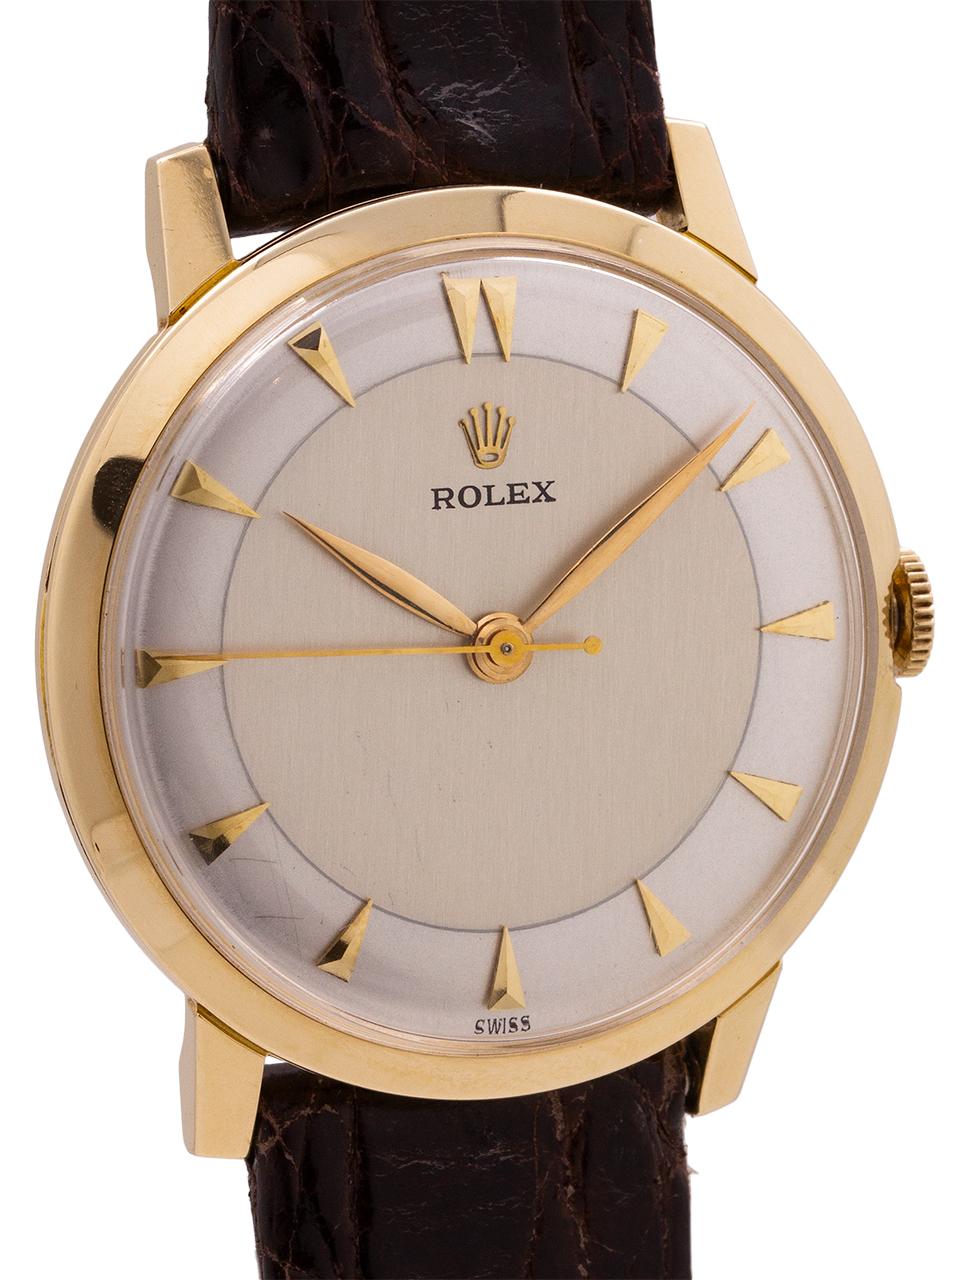 
Rolex 14K YG manual wind dress model circa 1960. Featuring a 33mm snap back case with the smooth bezel, and with low dome acrylic crystal. With beautiful condition restored two tone silver dial with applied gold dagger style indexes and Rolex logo,